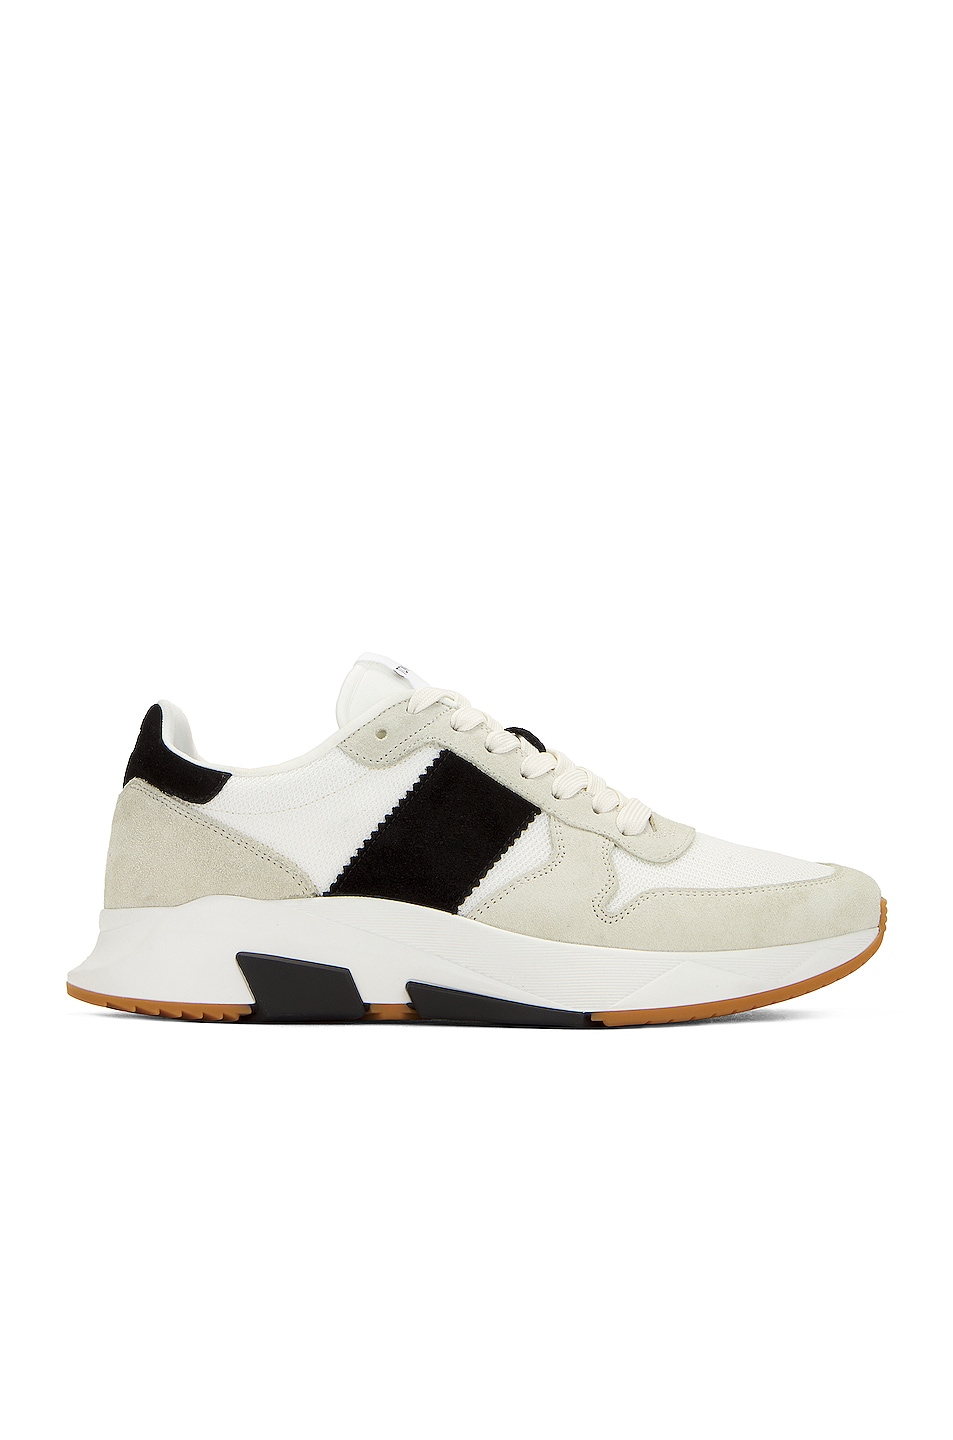 Image 1 of TOM FORD Suede + Technical Material Low Top Sneakers in Marble, Black, & White